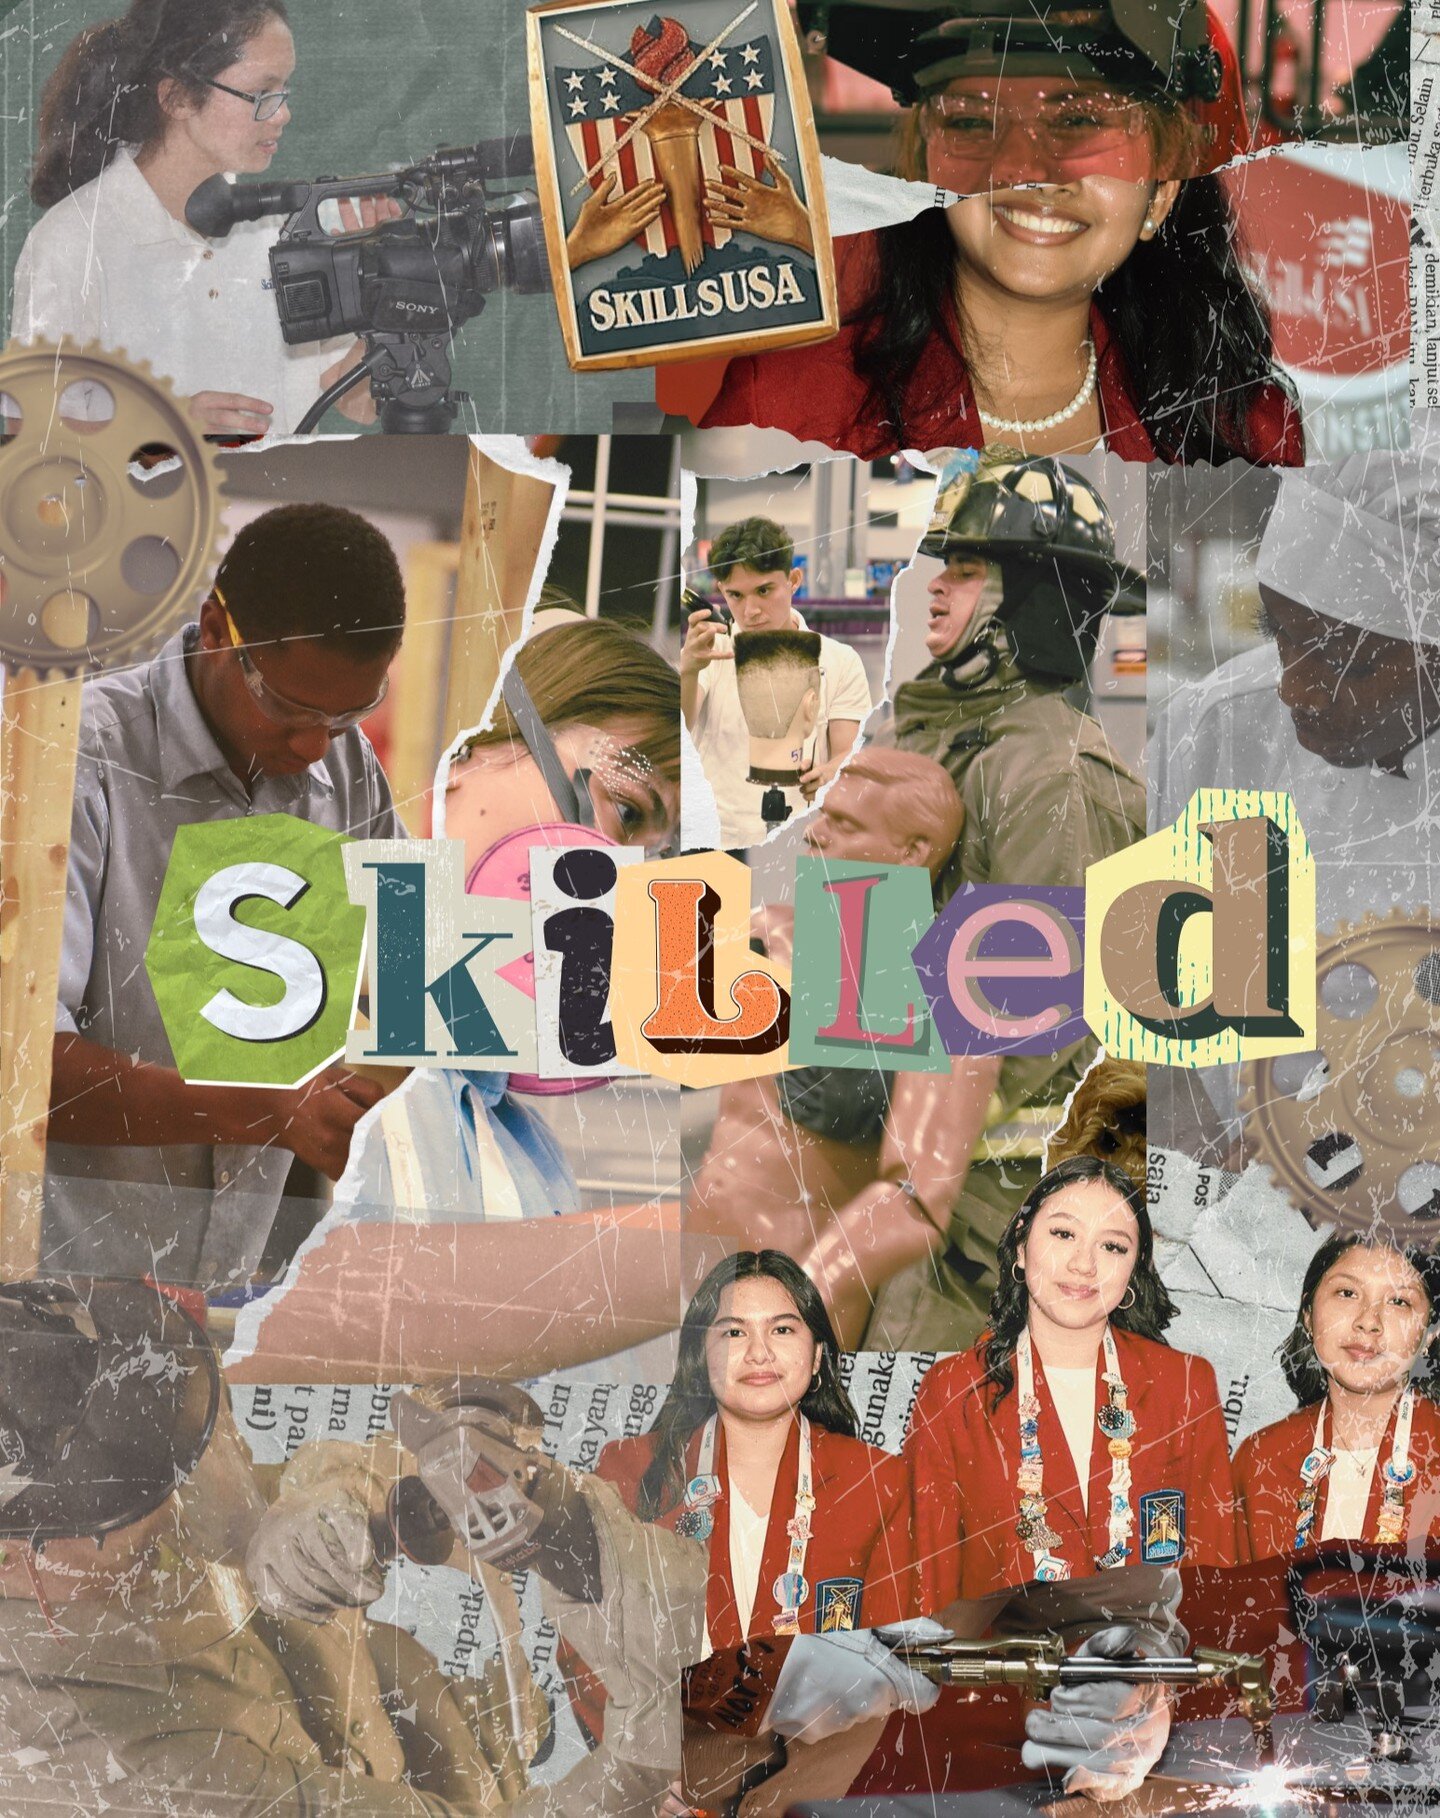 ✨Diversity in Skills, Unity in Purpose✨ SkillsUSA is in the running as one of the top 10 nonprofits for a part of a $1,000,000 donation from the LKQ Community Foundation this holiday season! 🎉🎁 By voting for SkillsUSA, you're not just supporting a 